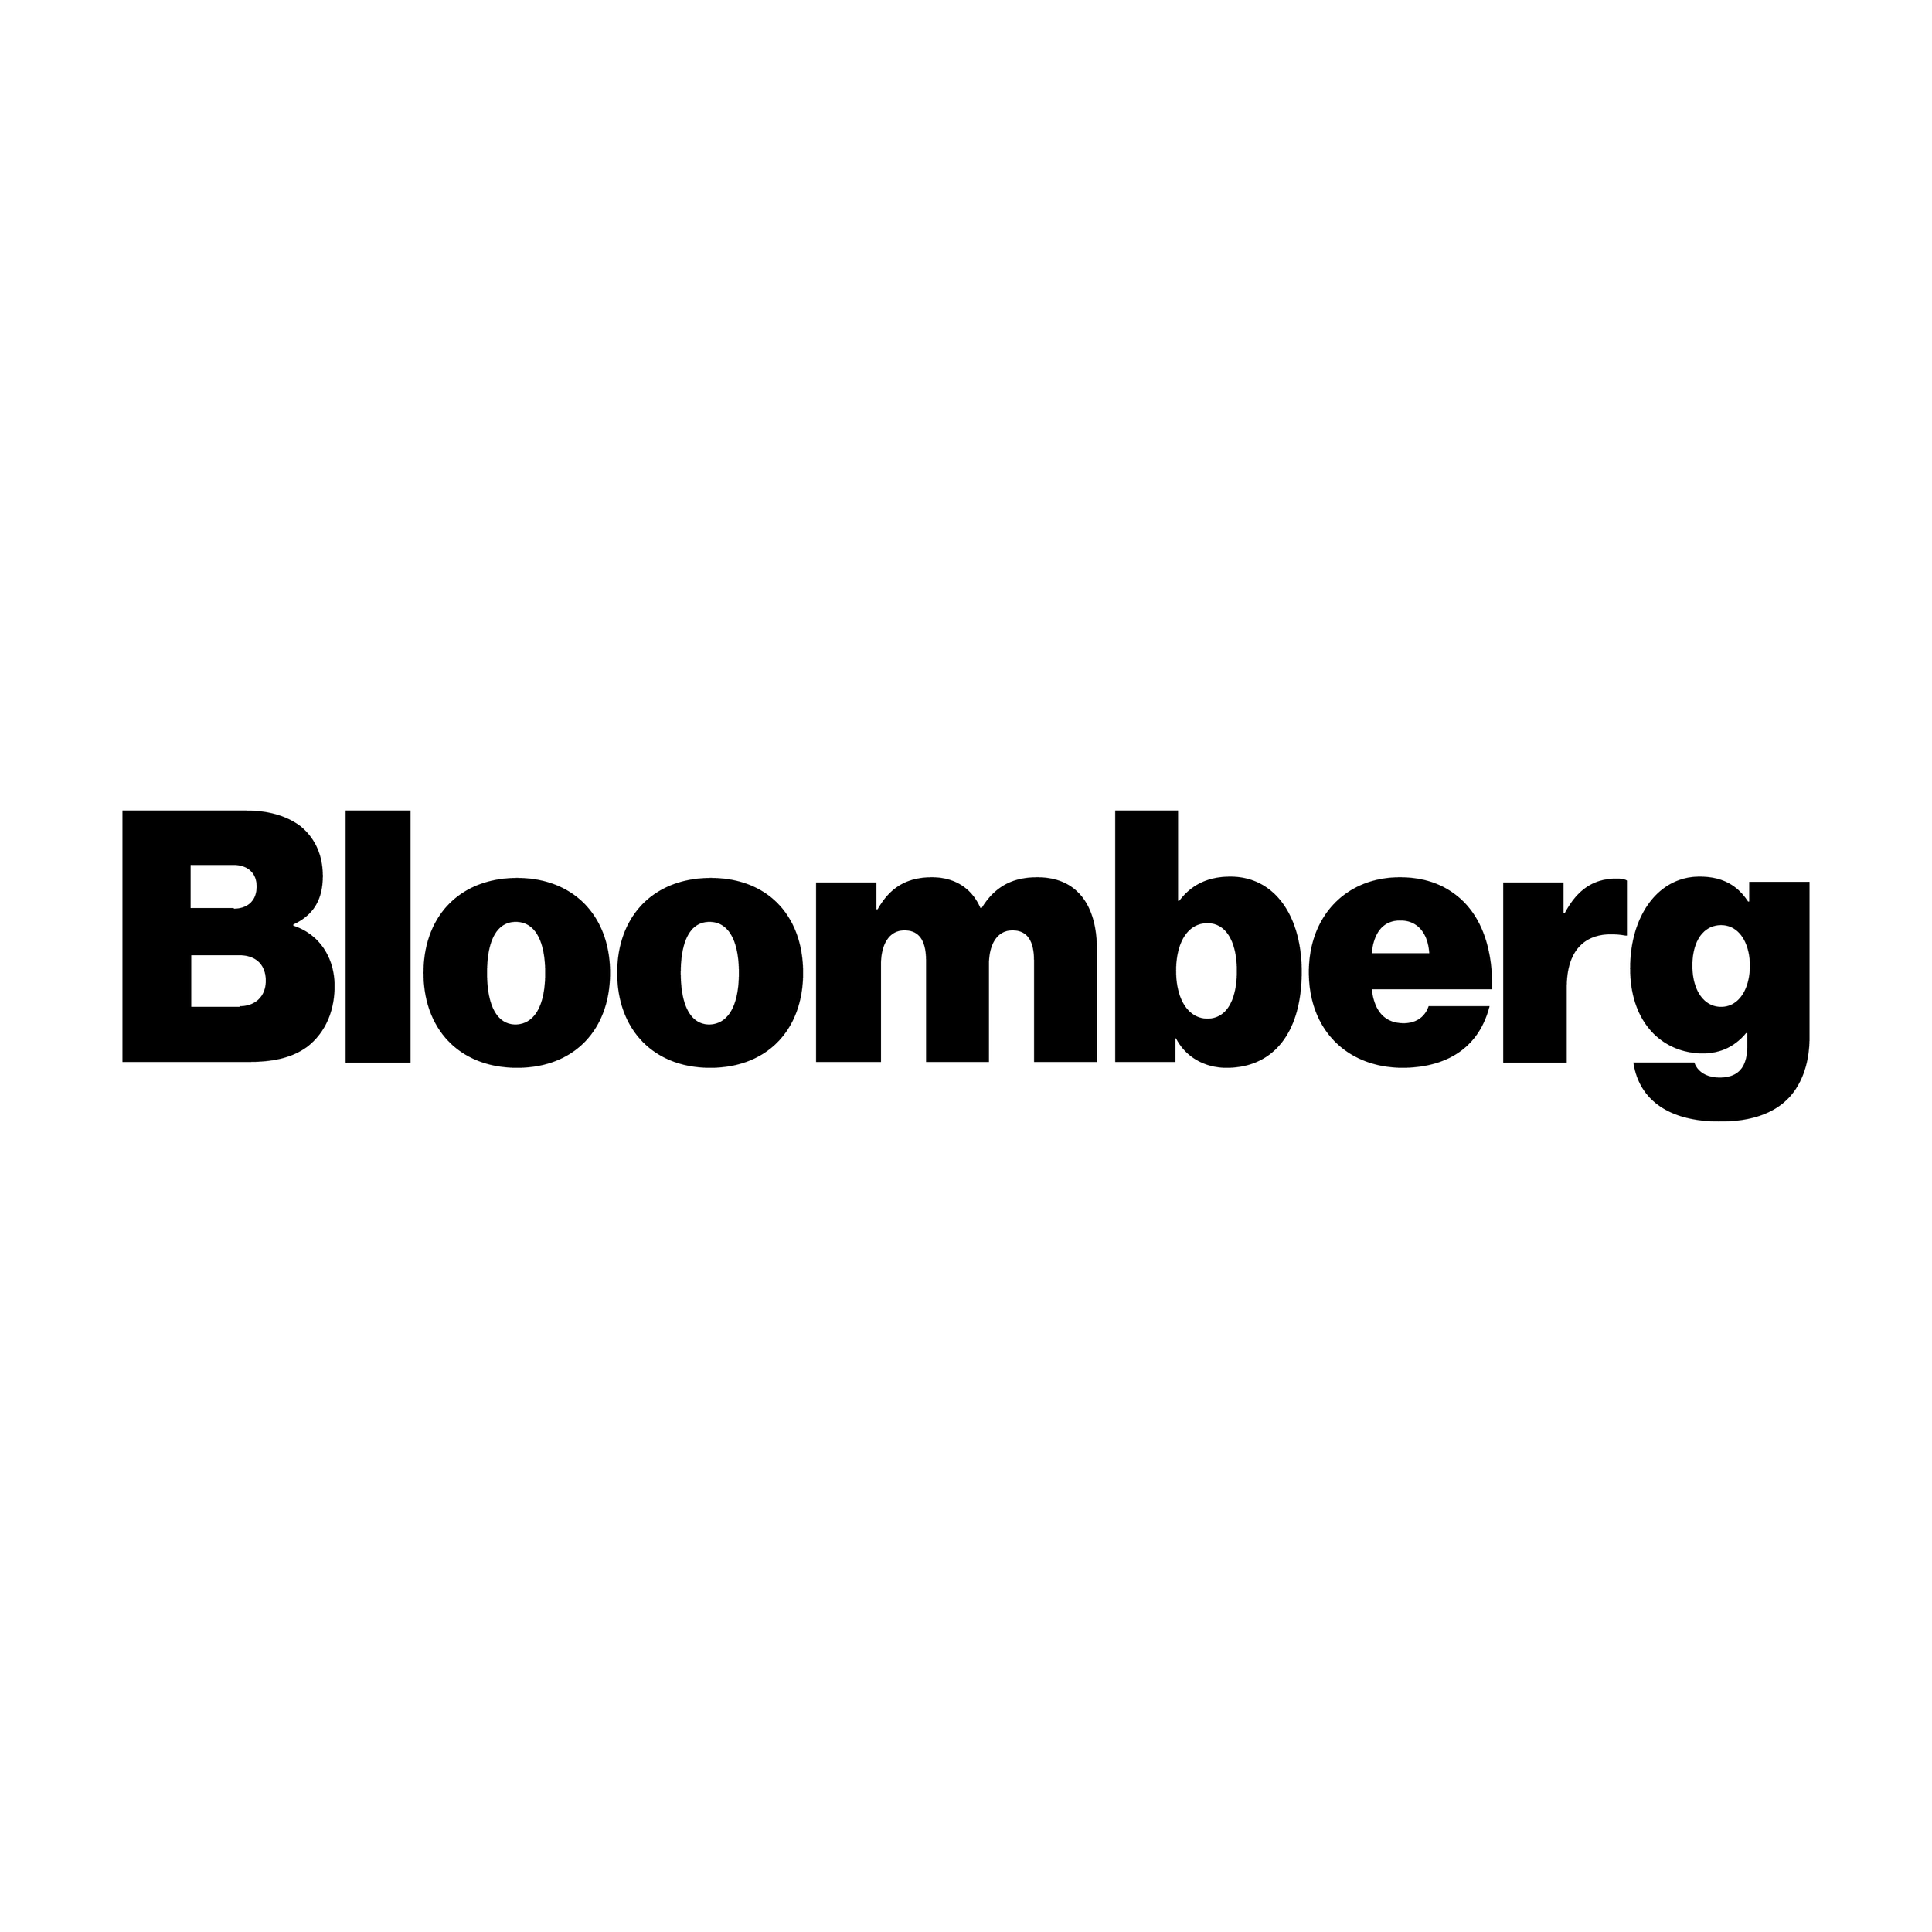 Bloomberg, July 2018